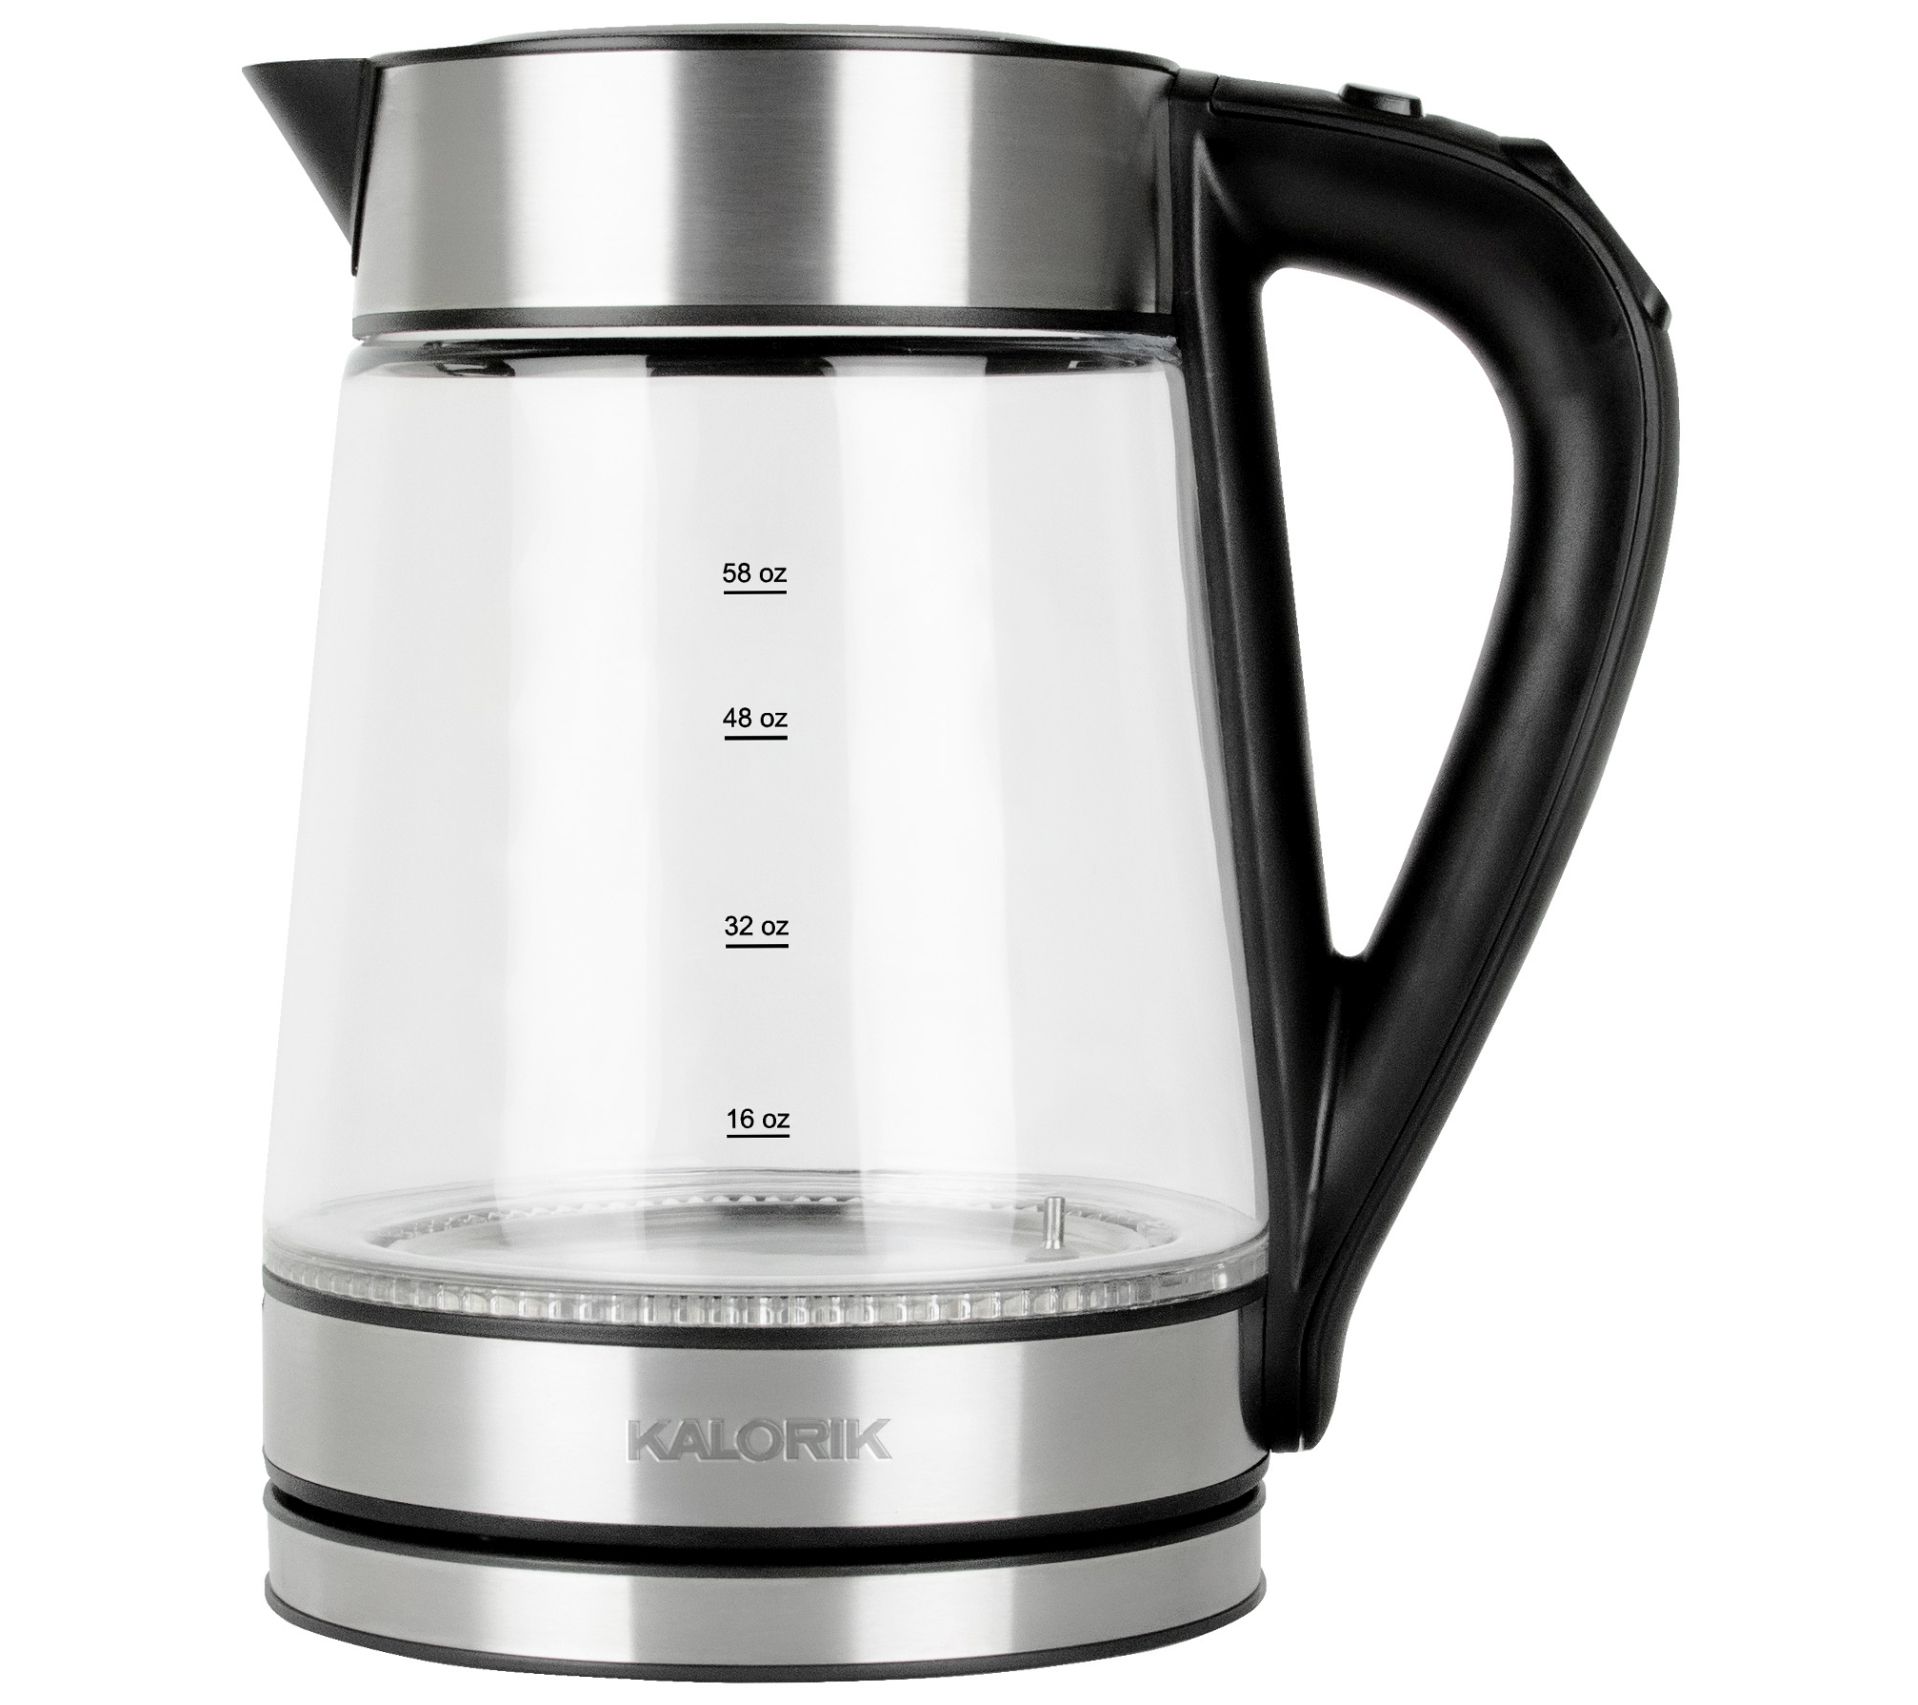 Chefman 1.8L Digital Electric Glass Kettle in R ose 